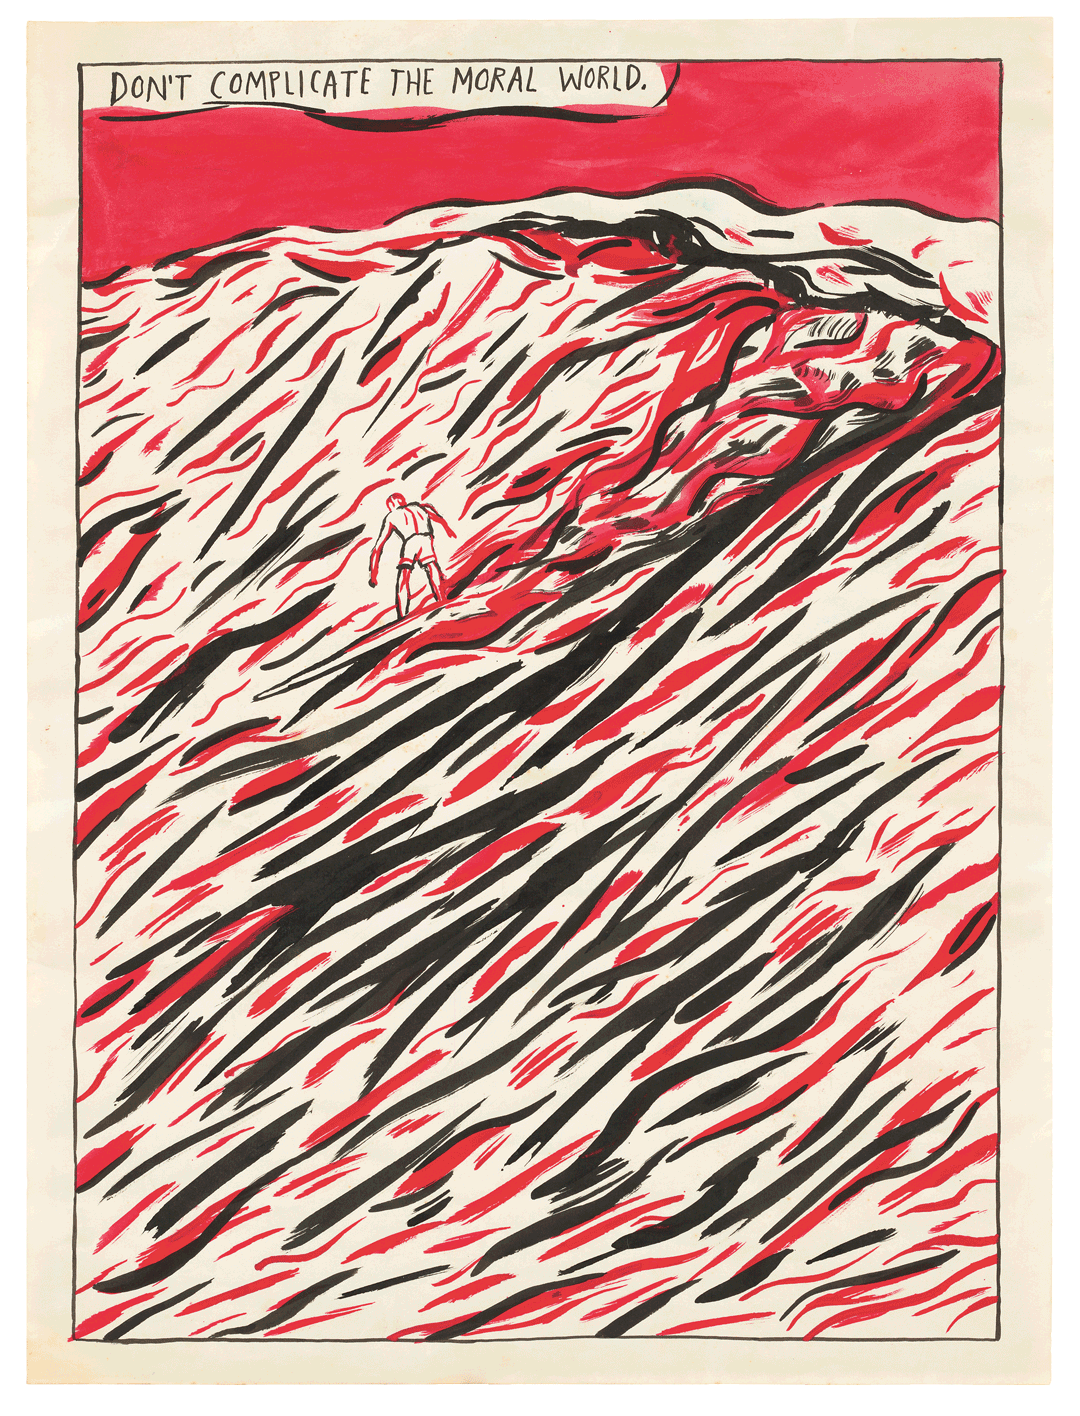 A drawing by Raymond Pettibon titled No Title (Don't complicate...), dated 1987.